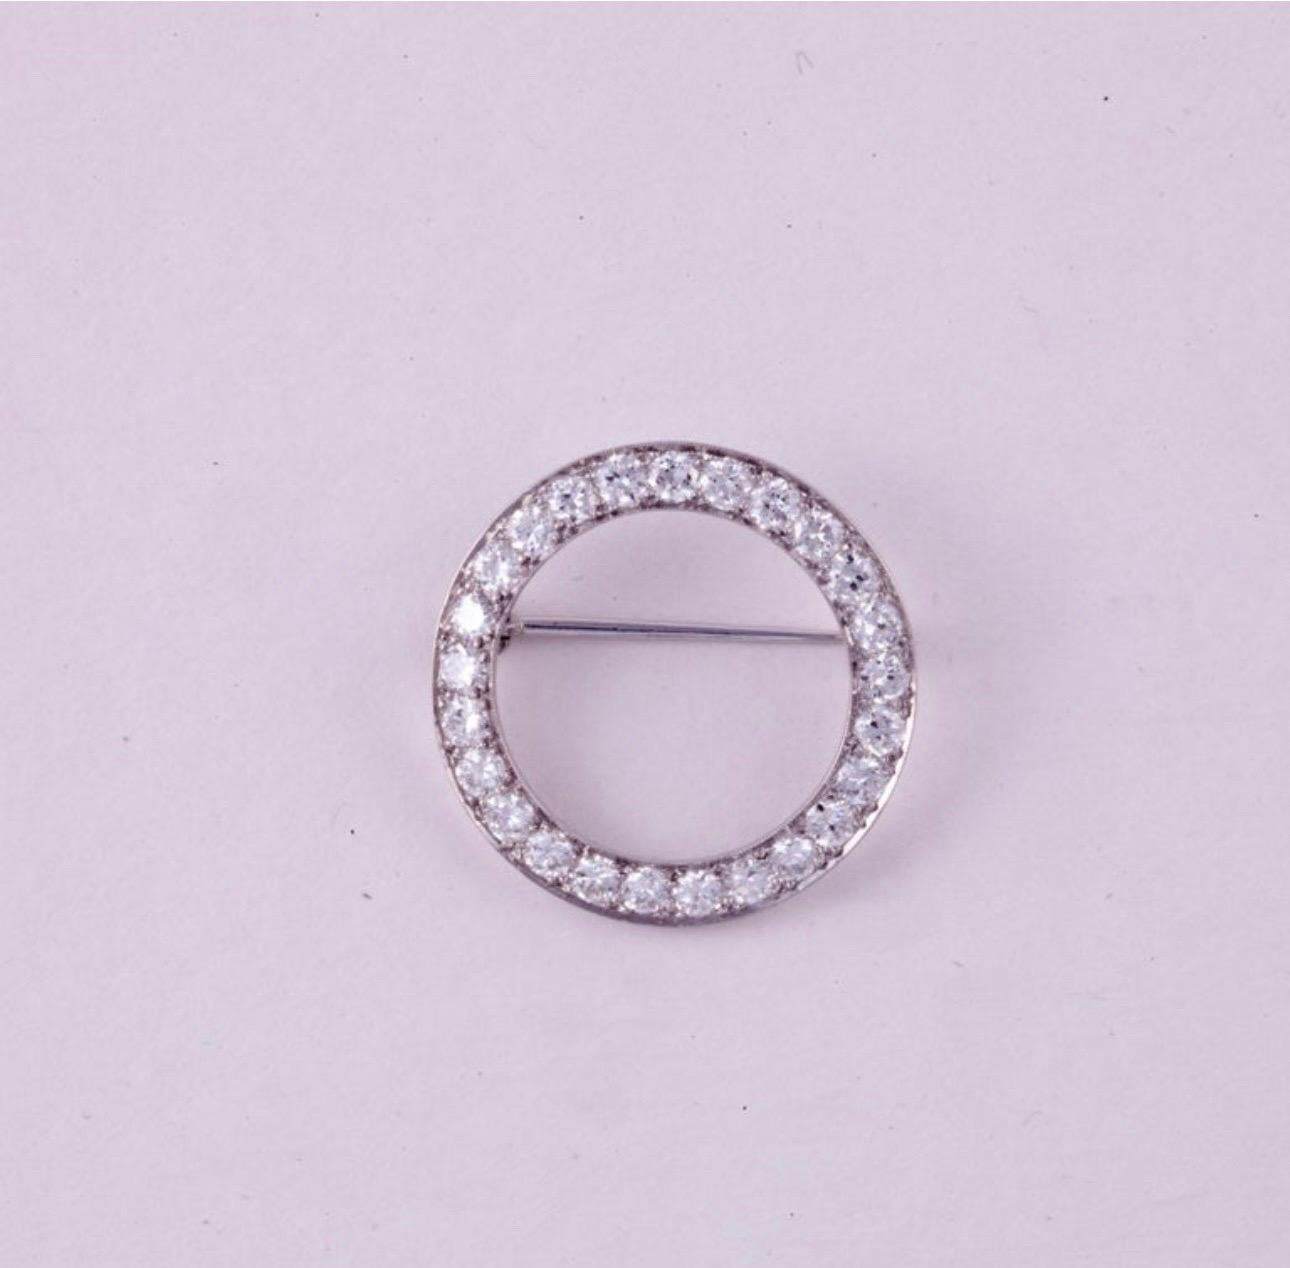  Circular platinum brooch/pin / Pendant  1.5 inch  Diameter with  6.5 cts Brilliant cut round diamonds
Antique Diamond & Platinum Pin/Broach/ Pendant , VS Quality
Graduating size of diamonds 
It can be used as pendant too
Very High Quality